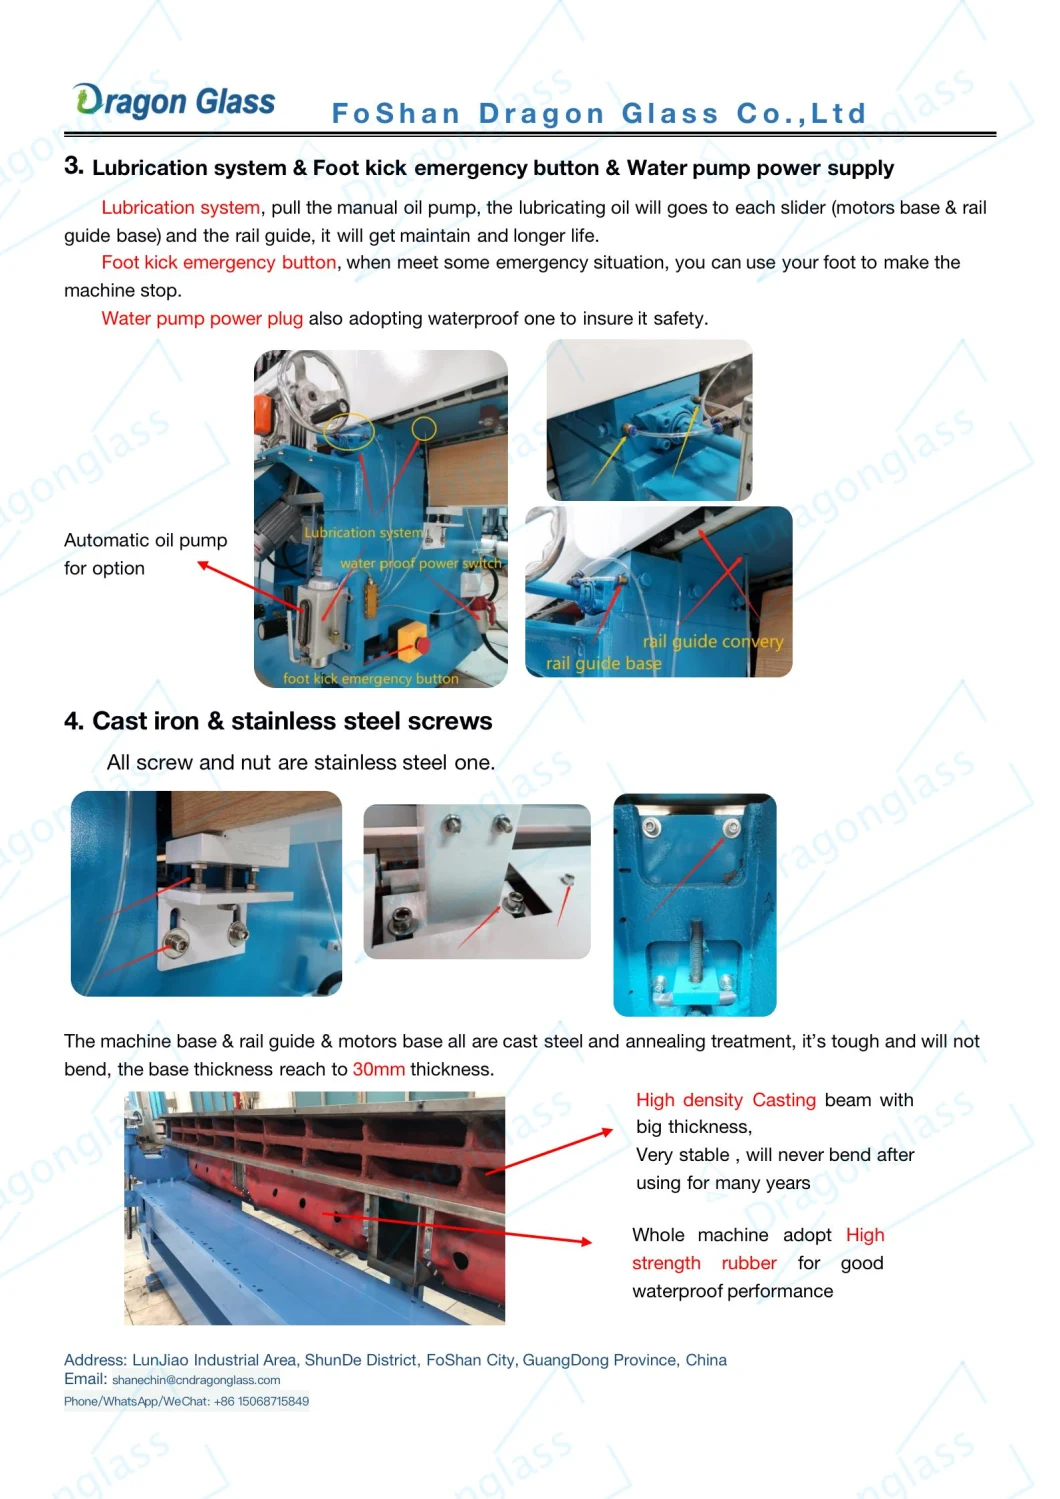 Mirror Glass 11 Spindle Glass Straight Line Bevel Edging Polishing Machine in High Speed Processing Machine